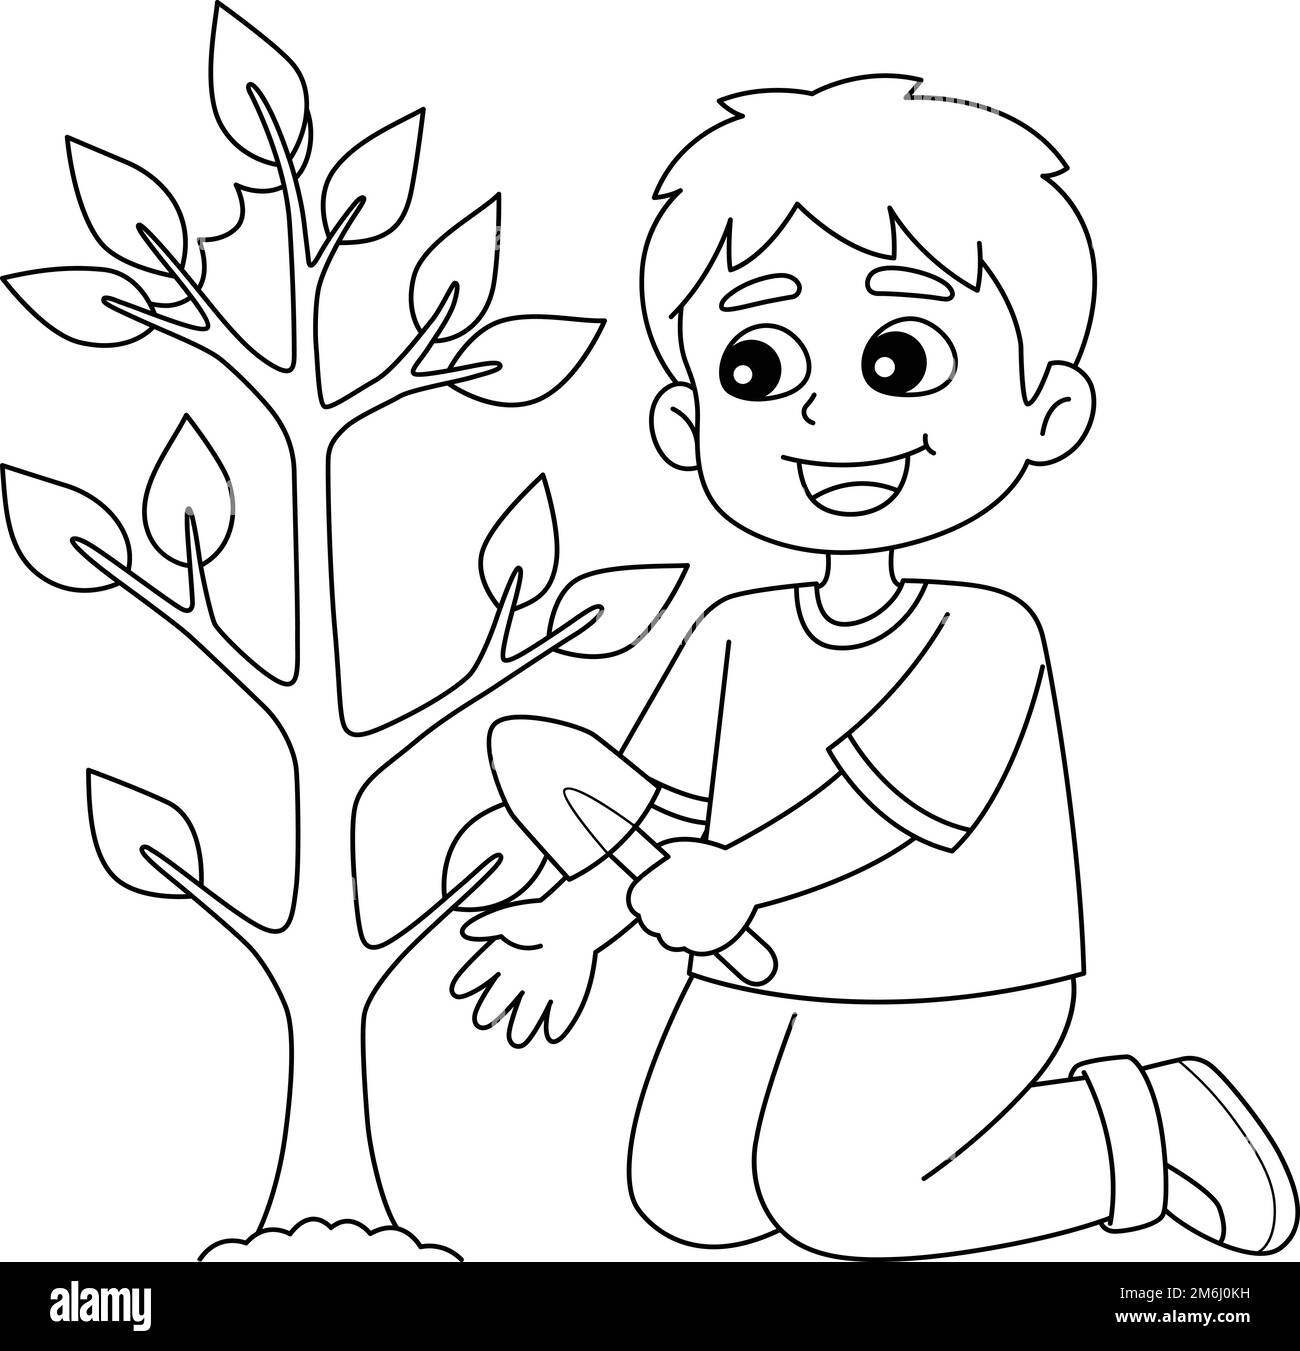 Boy Planting Trees Isolated Coloring Page  Stock Vector